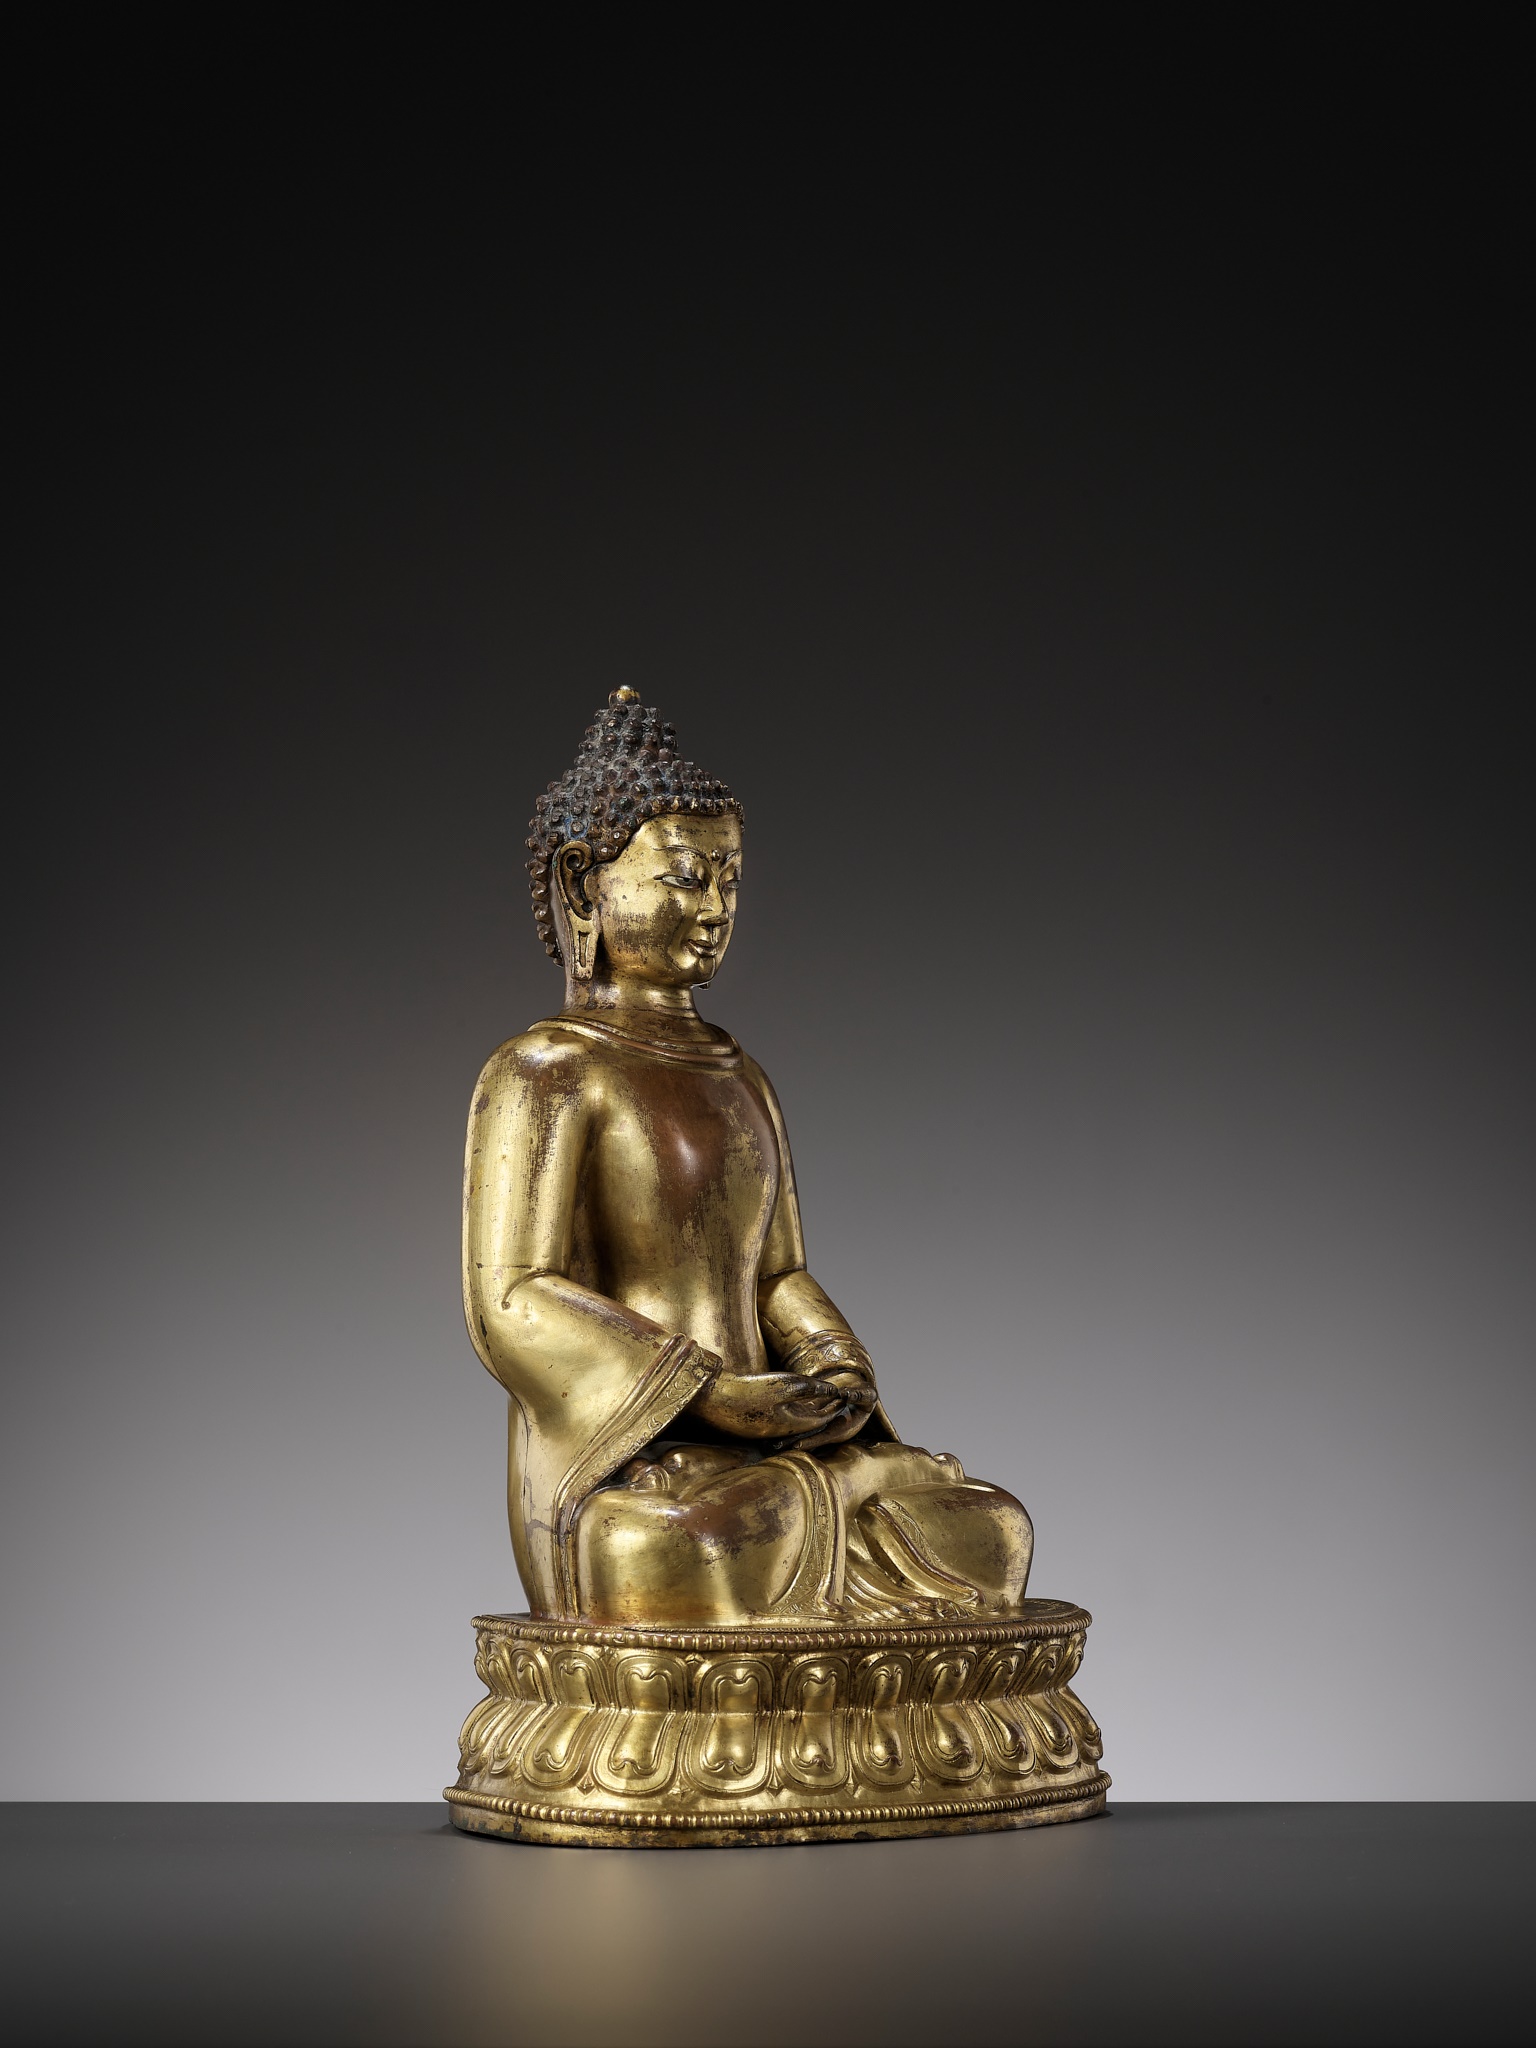 A GILT COPPER-ALLOY REPOUSSE FIGURE OF BUDDHA AMITABHA, WITH AN INSCRIPTION REFERRING TO THE SECOND - Image 13 of 16